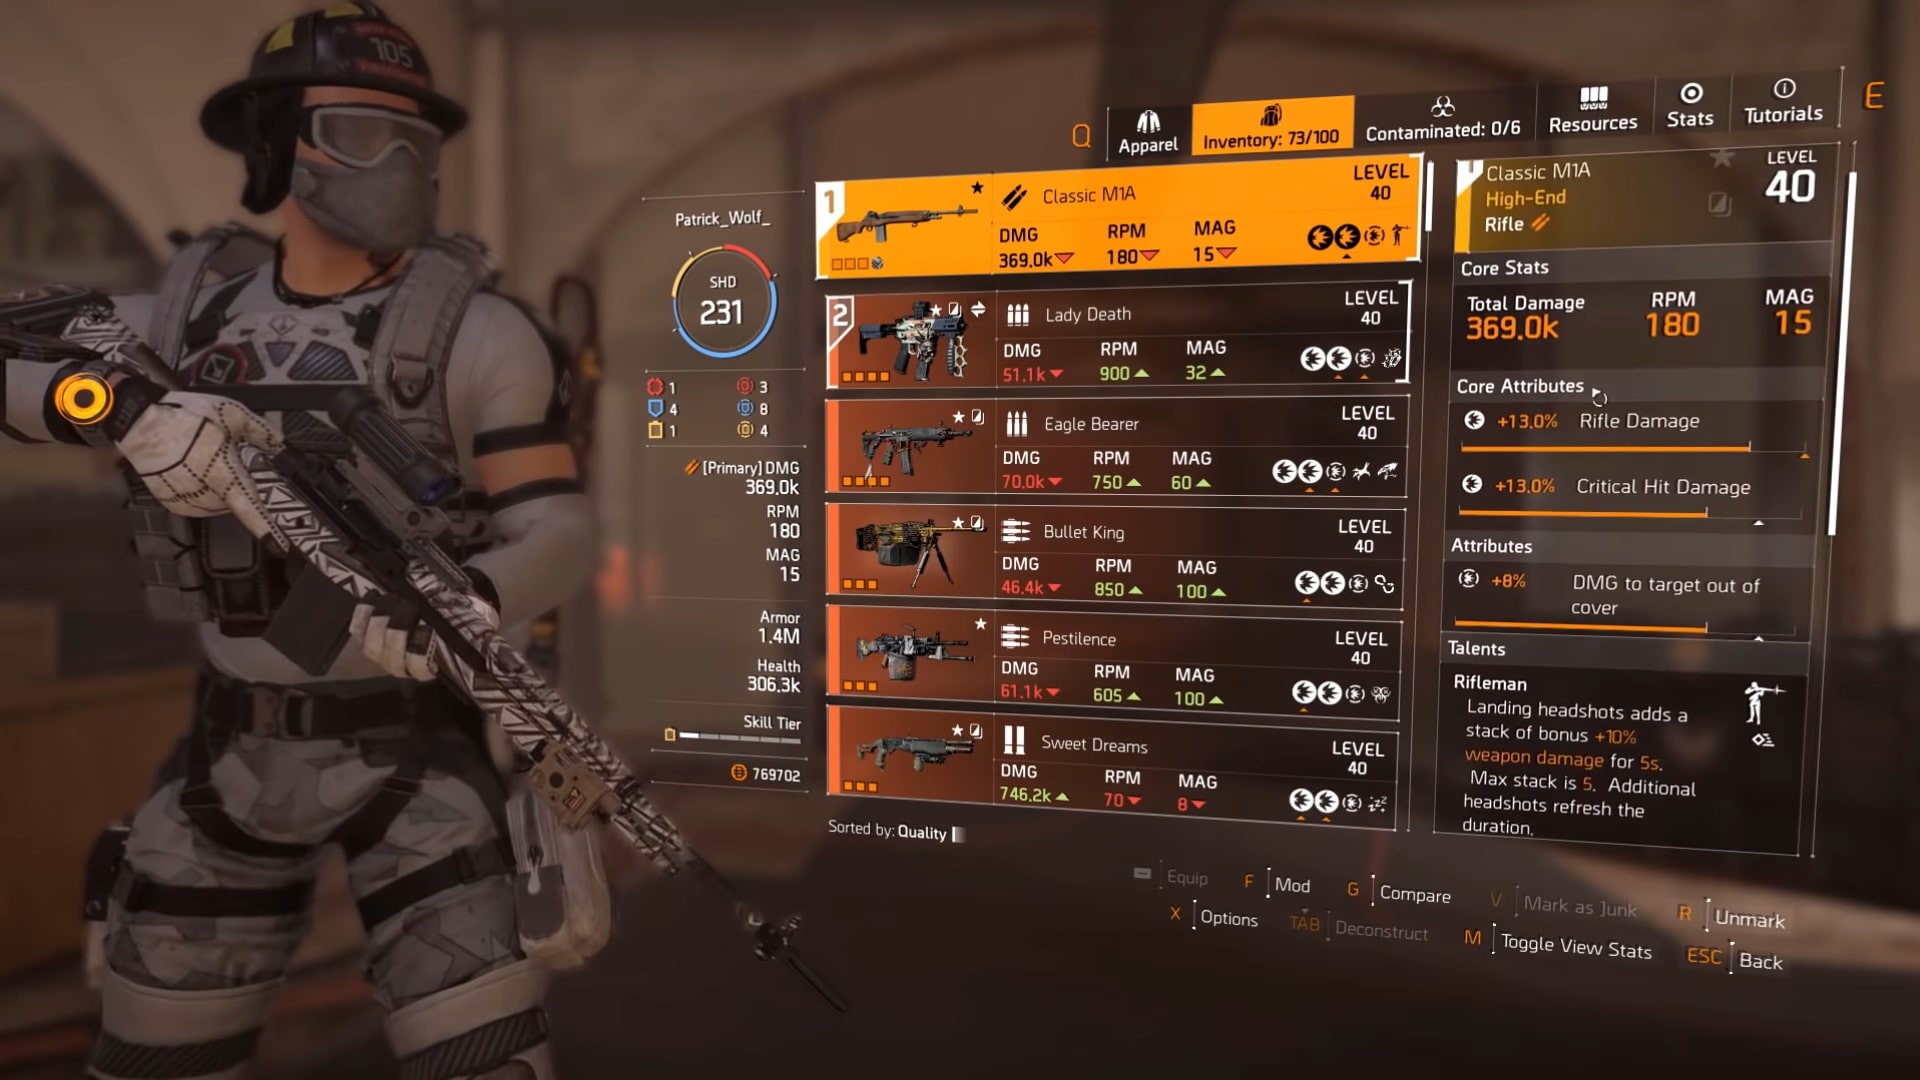 [Top 5] The Division 2 Best Solo Builds (May 2020) GAMERS DECIDE